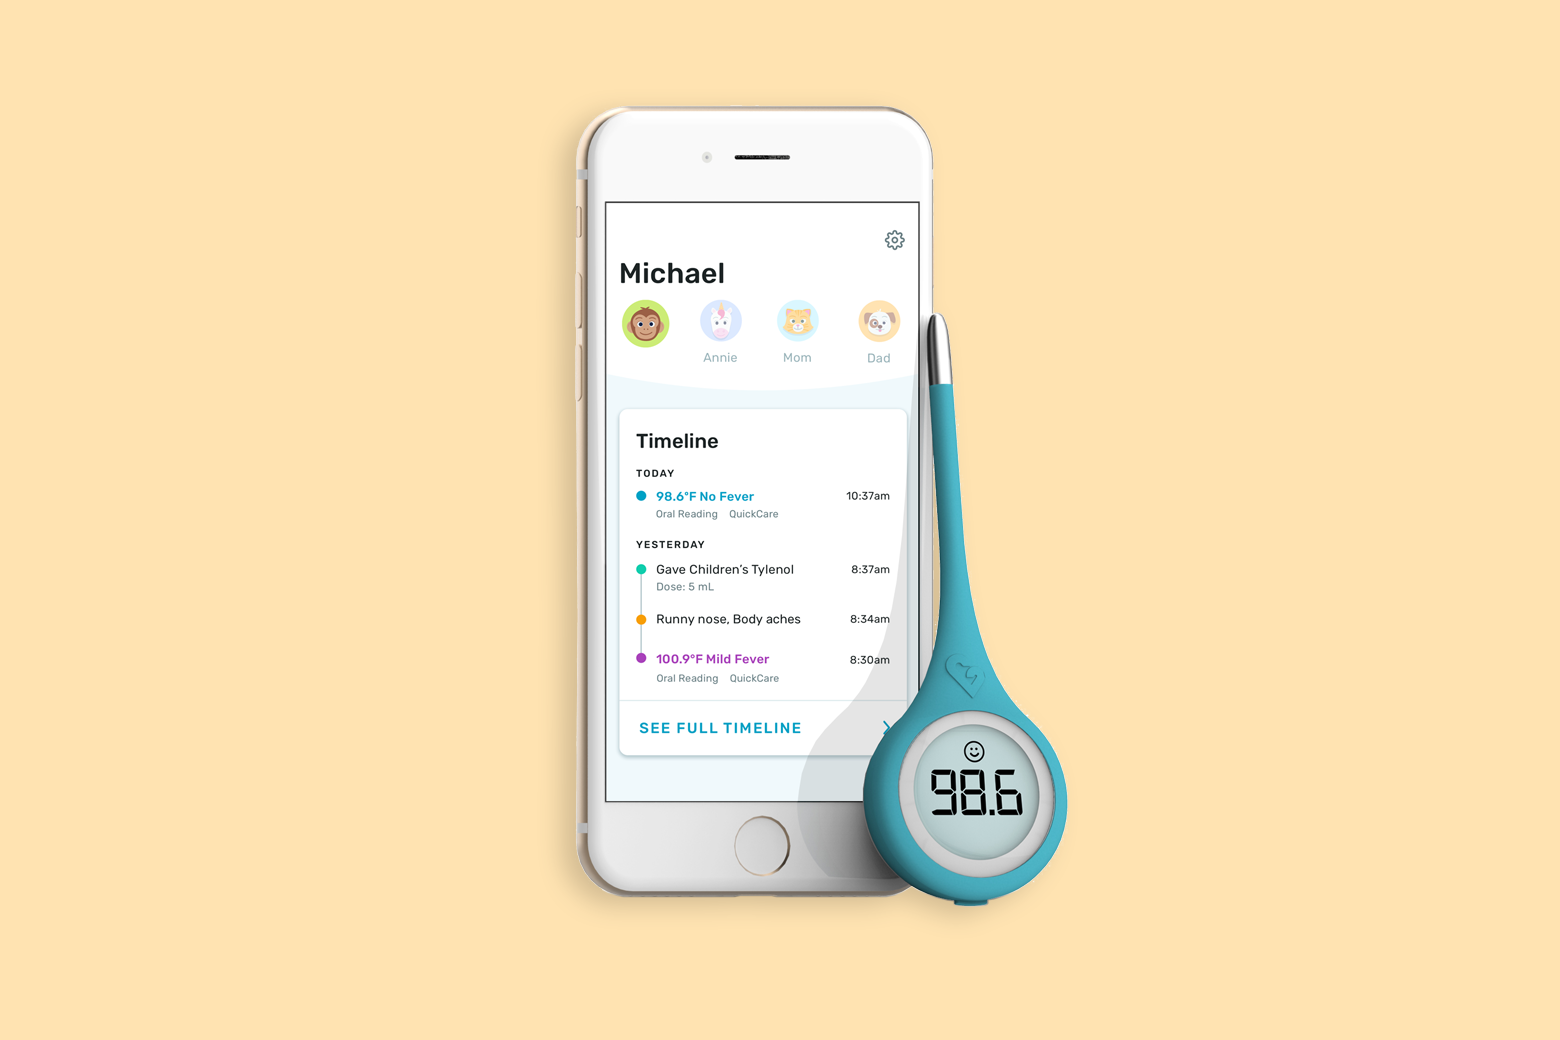 A Kinsa thermometer along with the mobile app.